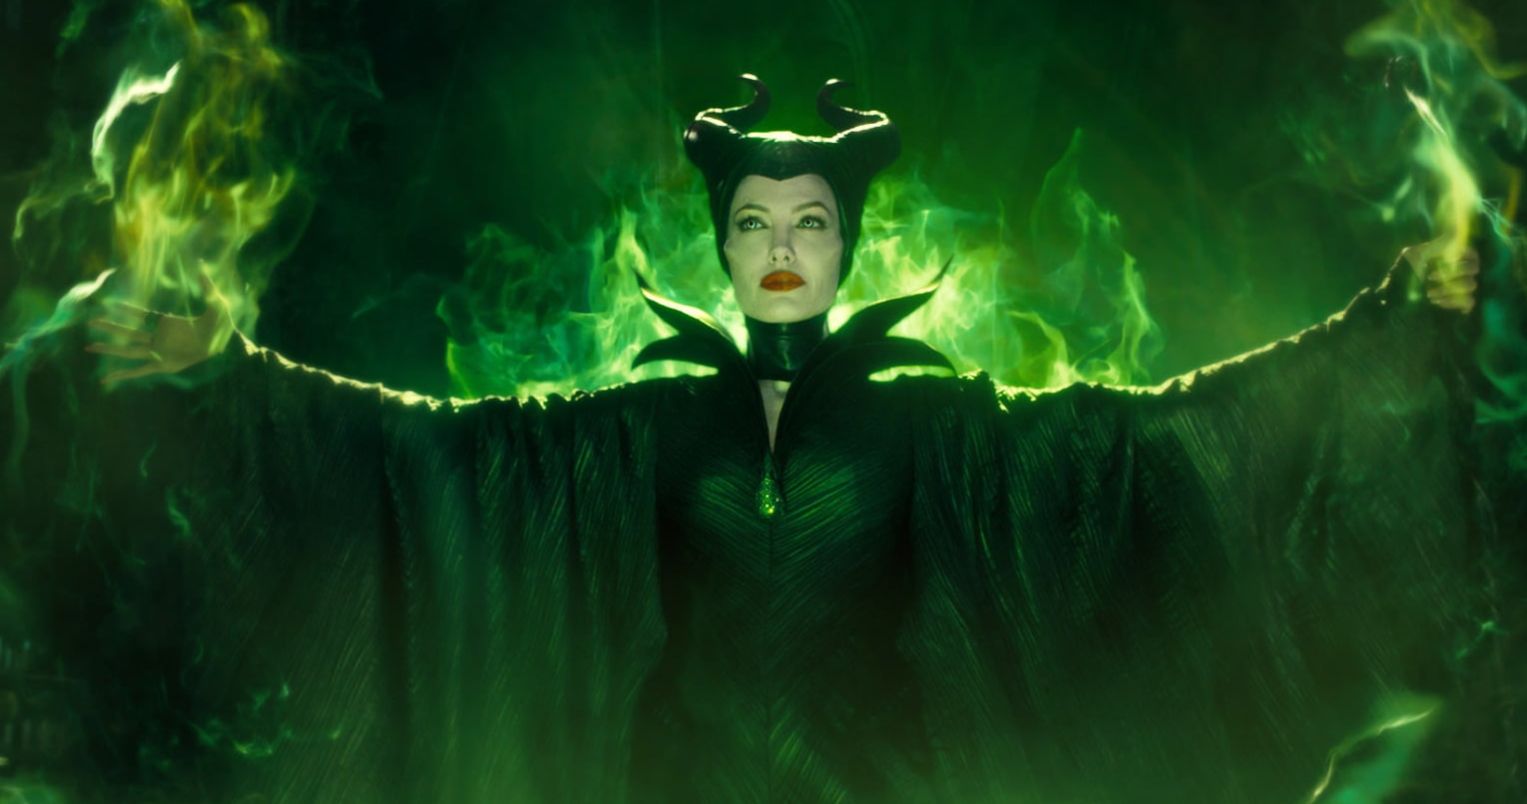 Maleficent 2 Featurette Conjures Behind-the-Scenes Magic with Angelina Jolie